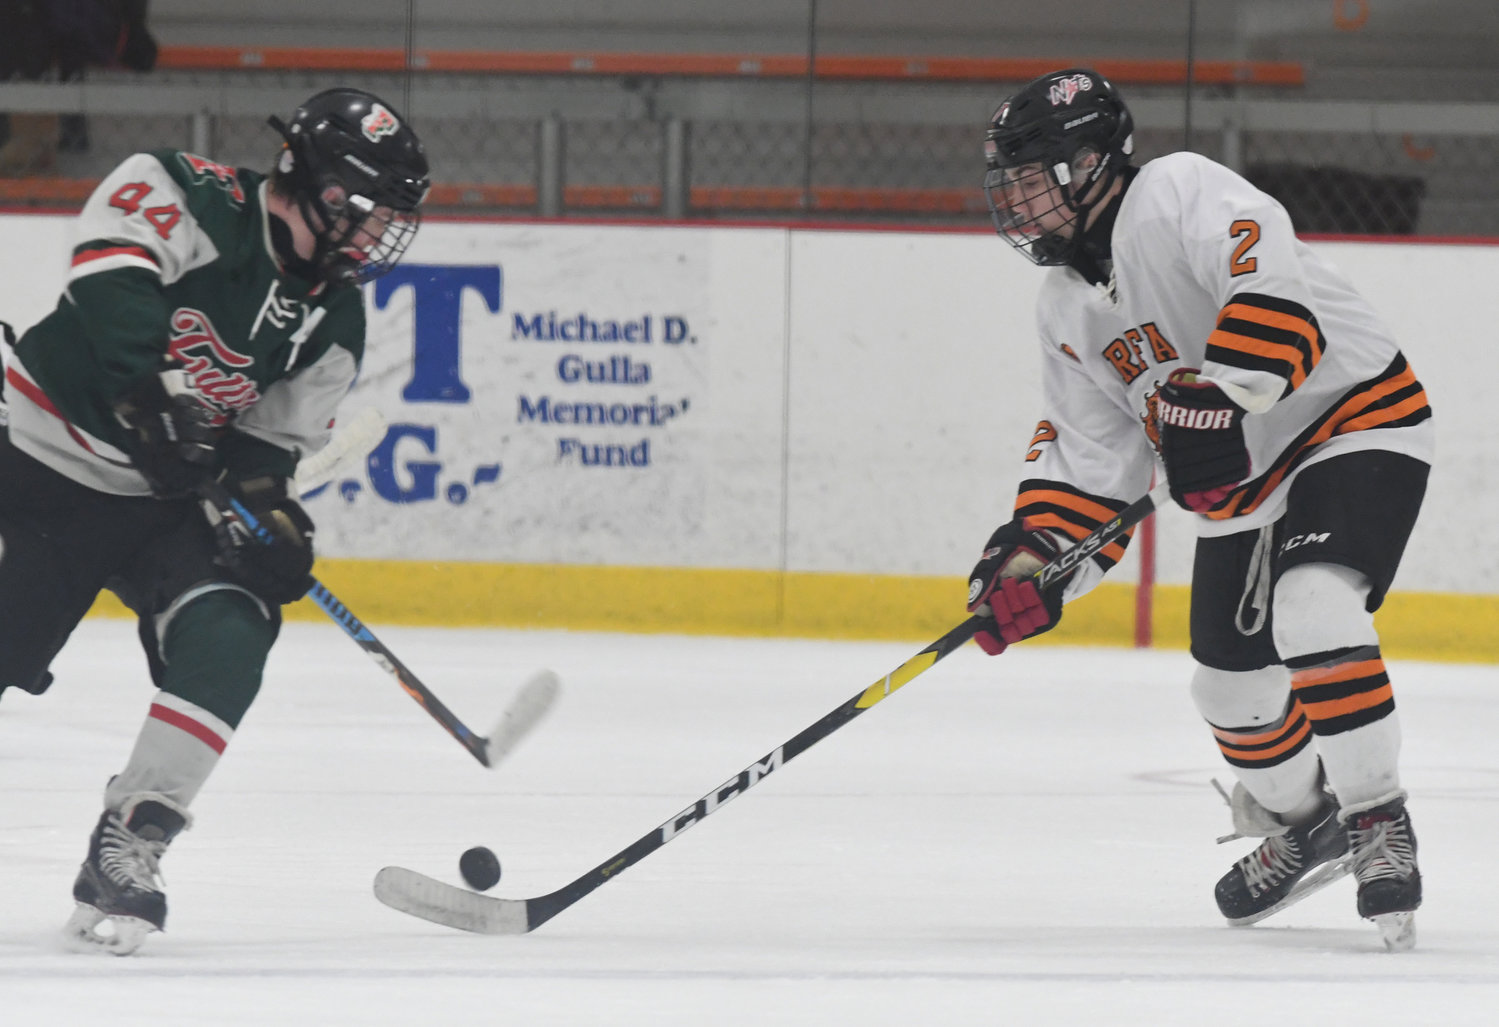 THREE-POINT NIGHT — Rome Free Academy’s Jake Hall, right, and Fulton’s Derek Schumaker battle for control of the puck Friday night at Kennedy Arena. The Black Knights won, 4-1, with Hall assisting on three of the goals.